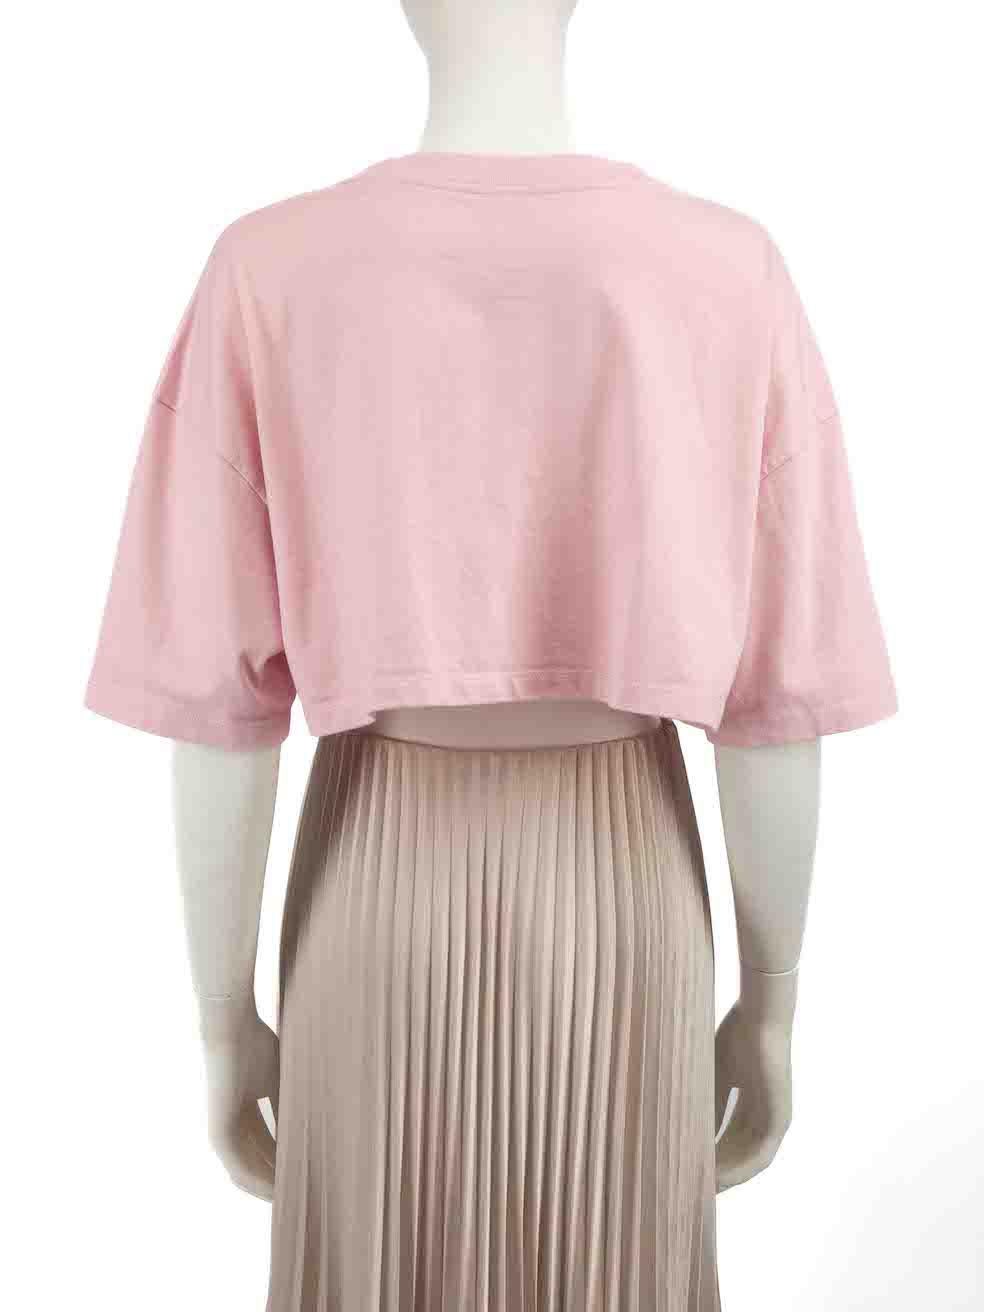 Loewe Pink Anagram Embroidered Cropped Top Size S In Good Condition For Sale In London, GB